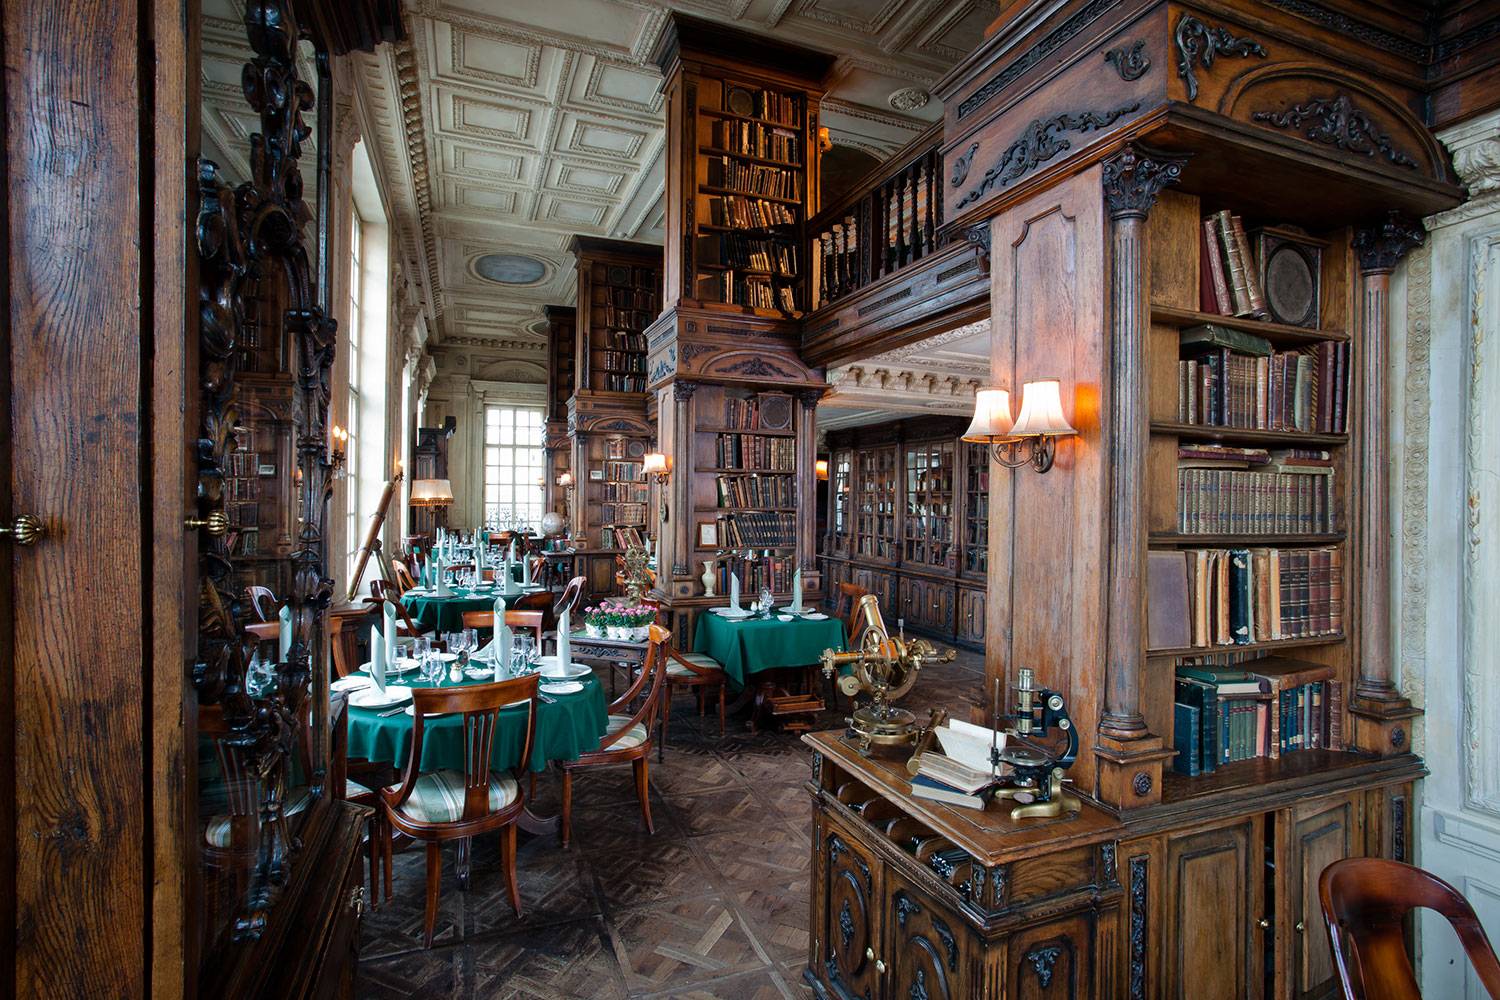 Cafe Pushkin Restaurant interior photo in Moscow